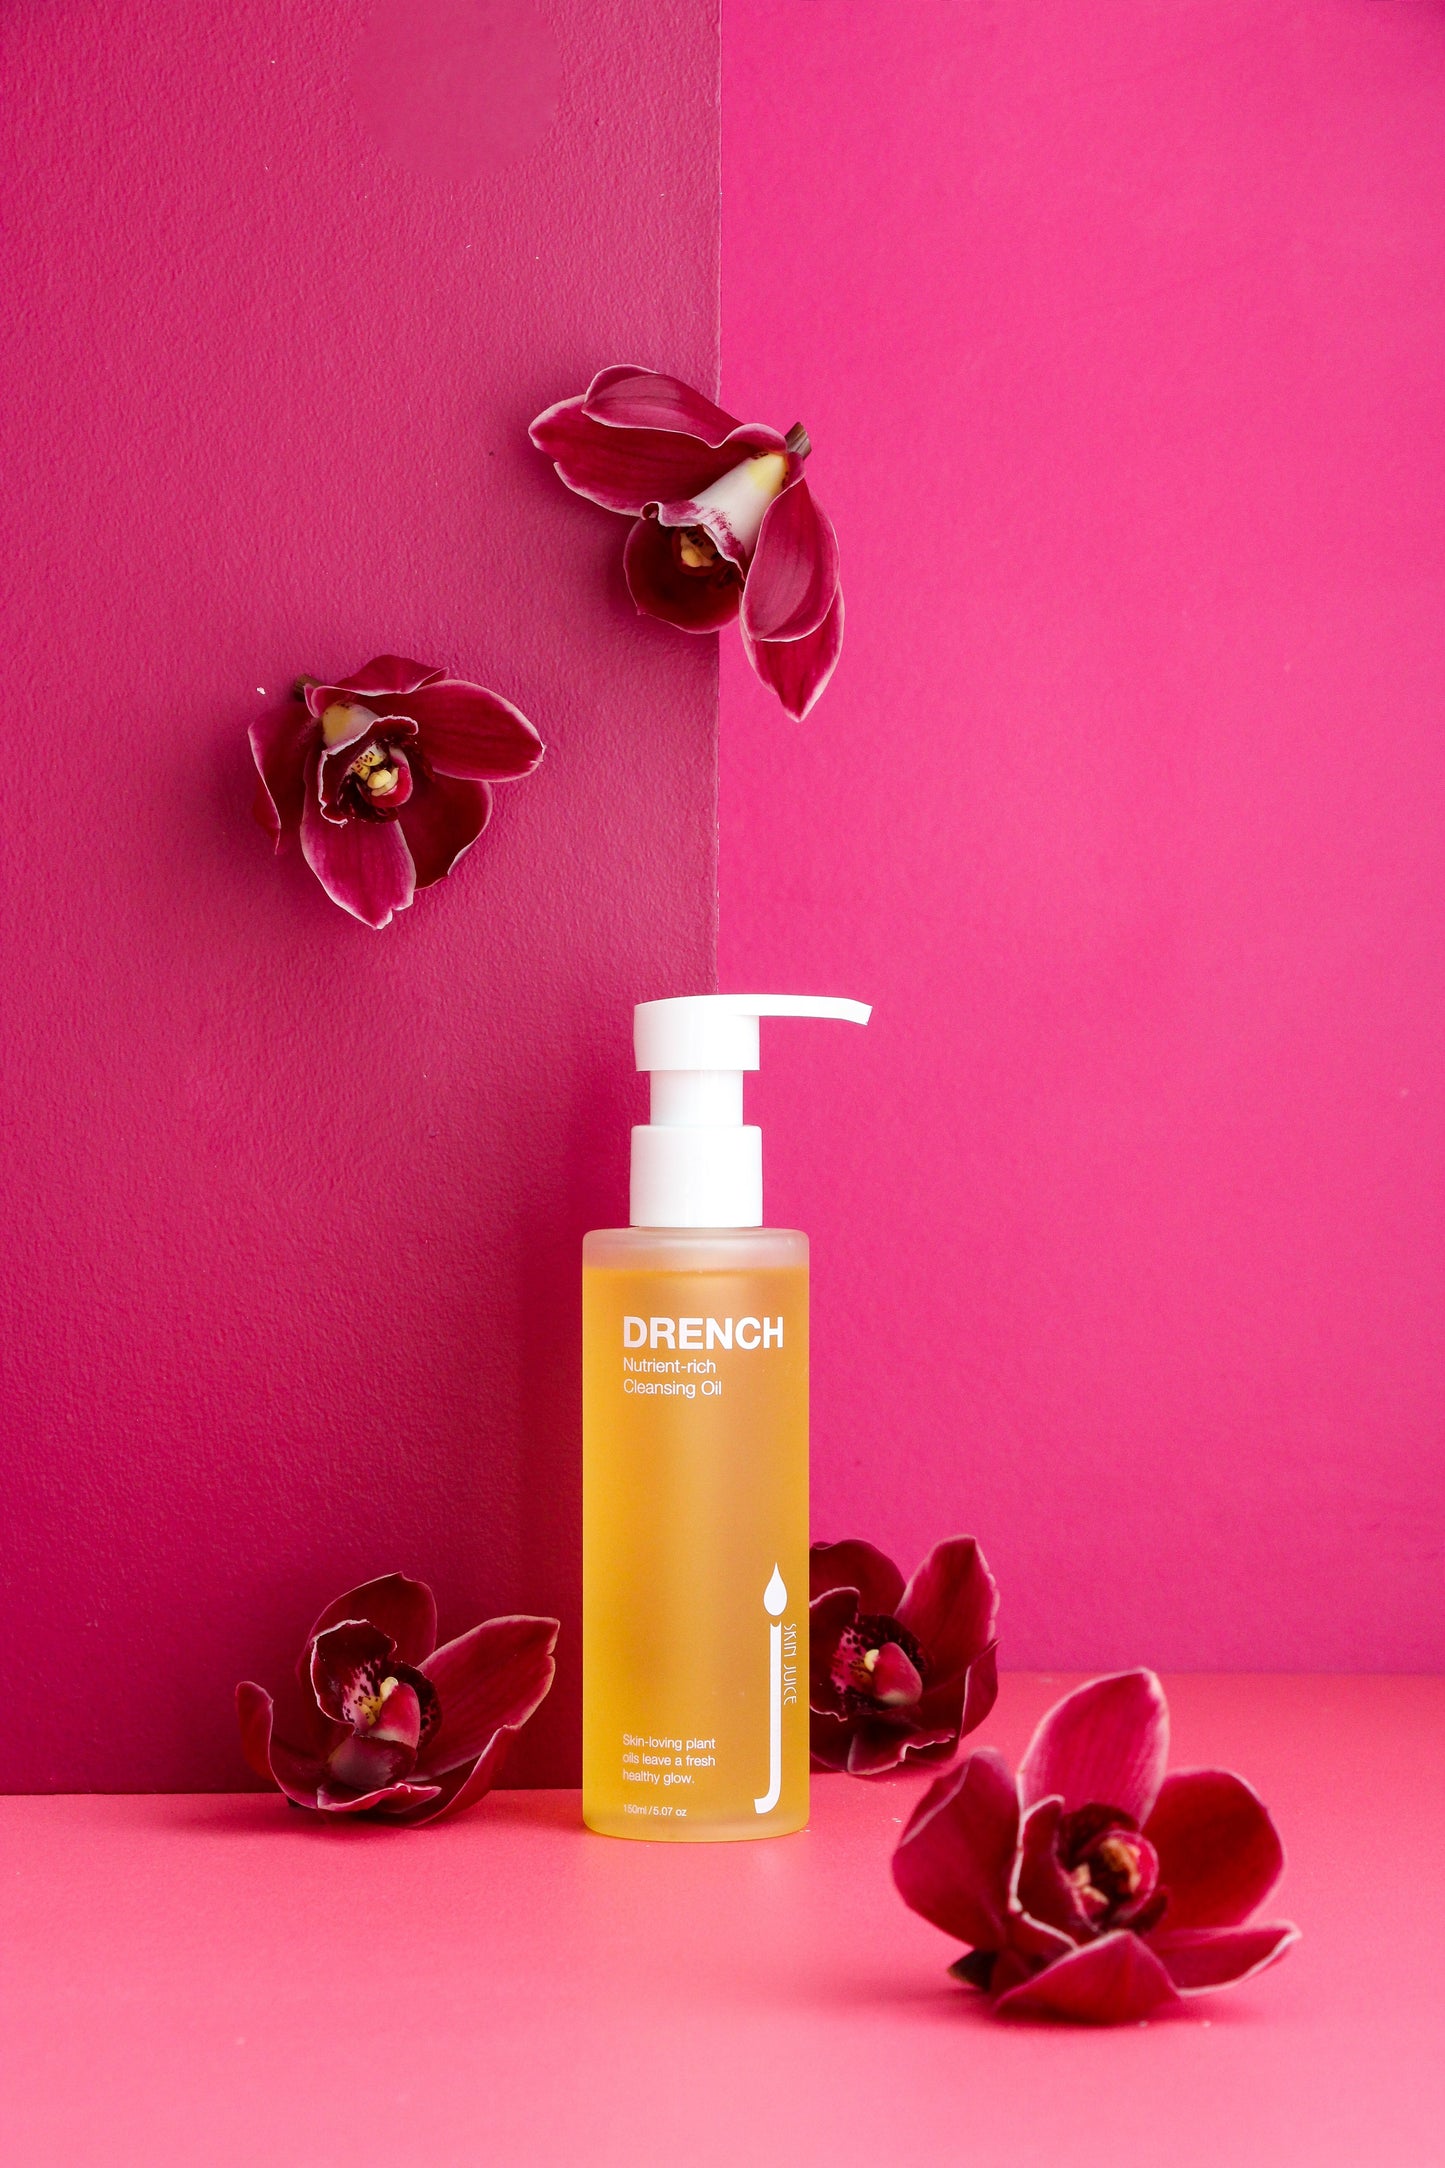 Drench - Hydrating Oil Cleanser